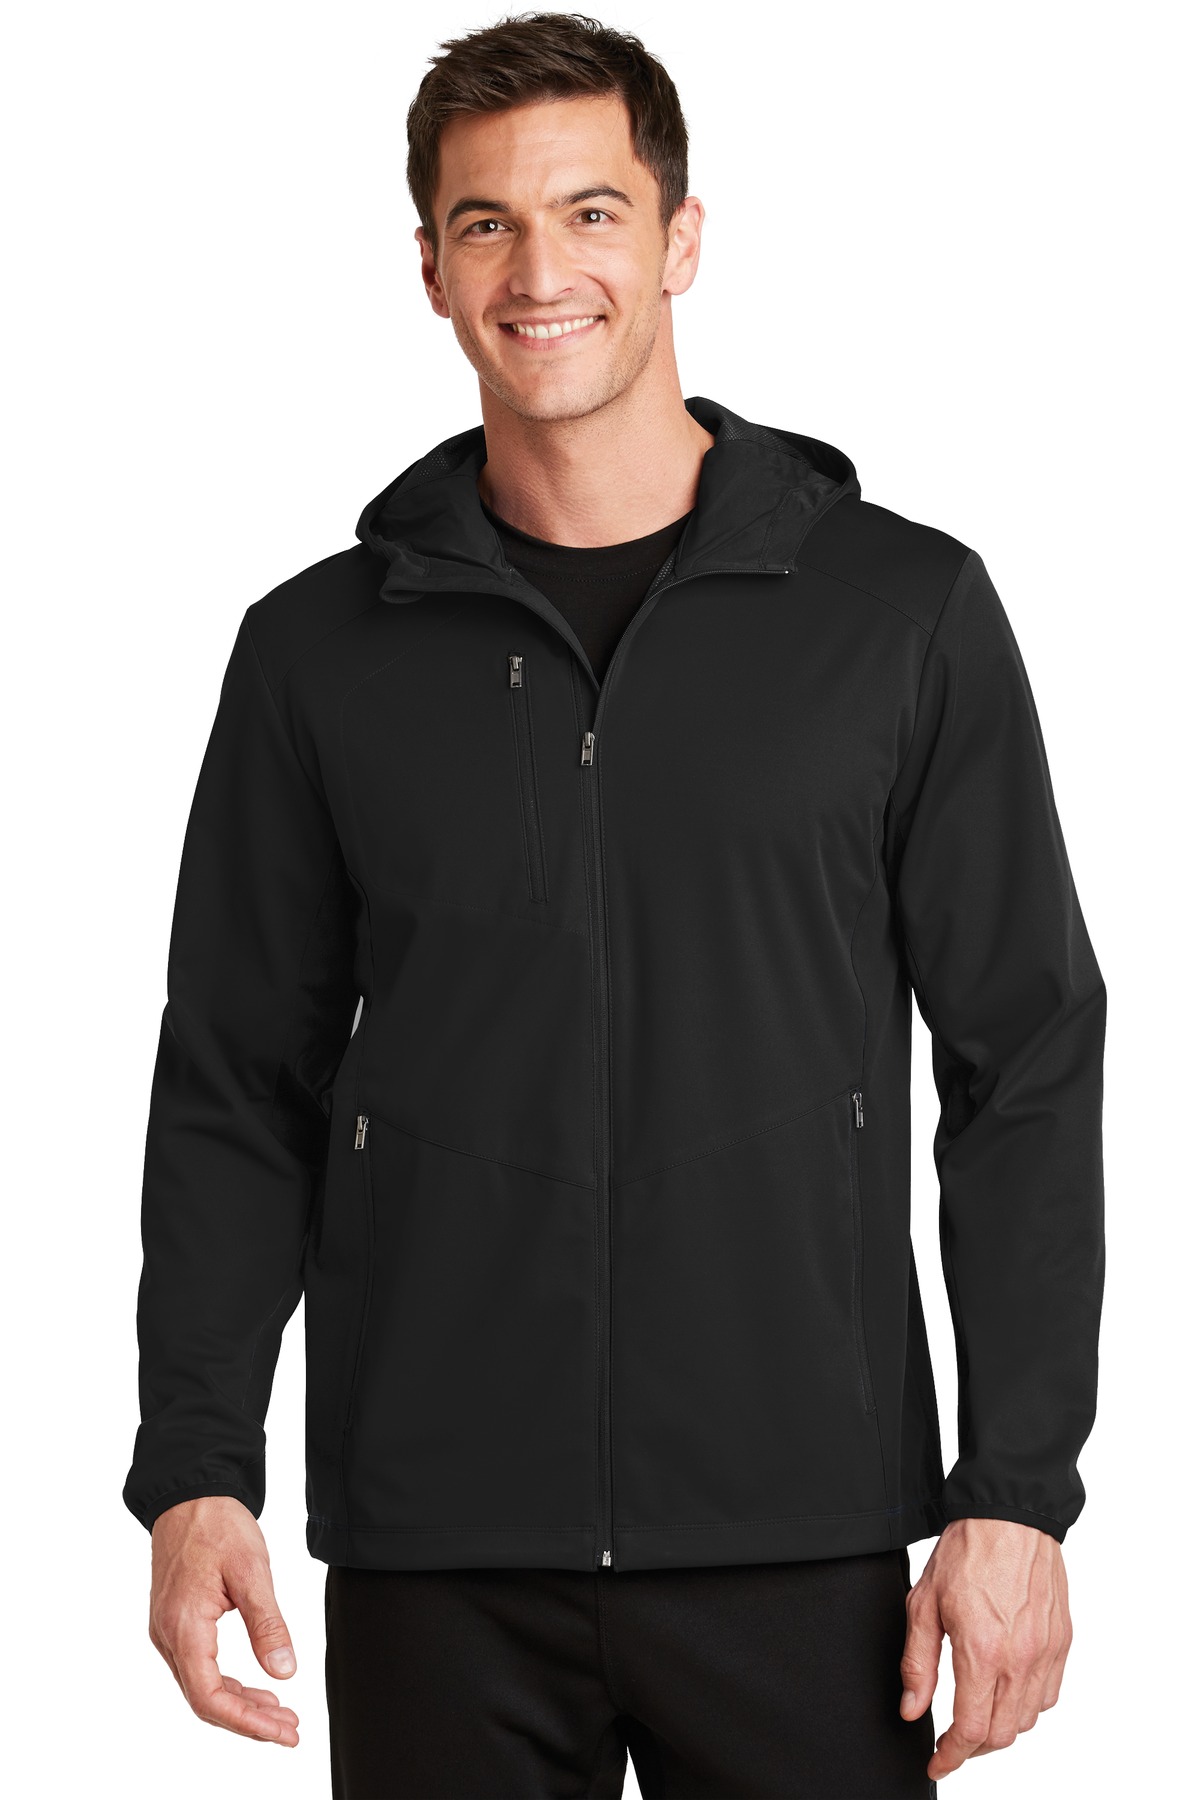 Port Authority Outerwear for Corporate & Hospitality ® Active Hooded Soft Shell Jacket.-Port Authority